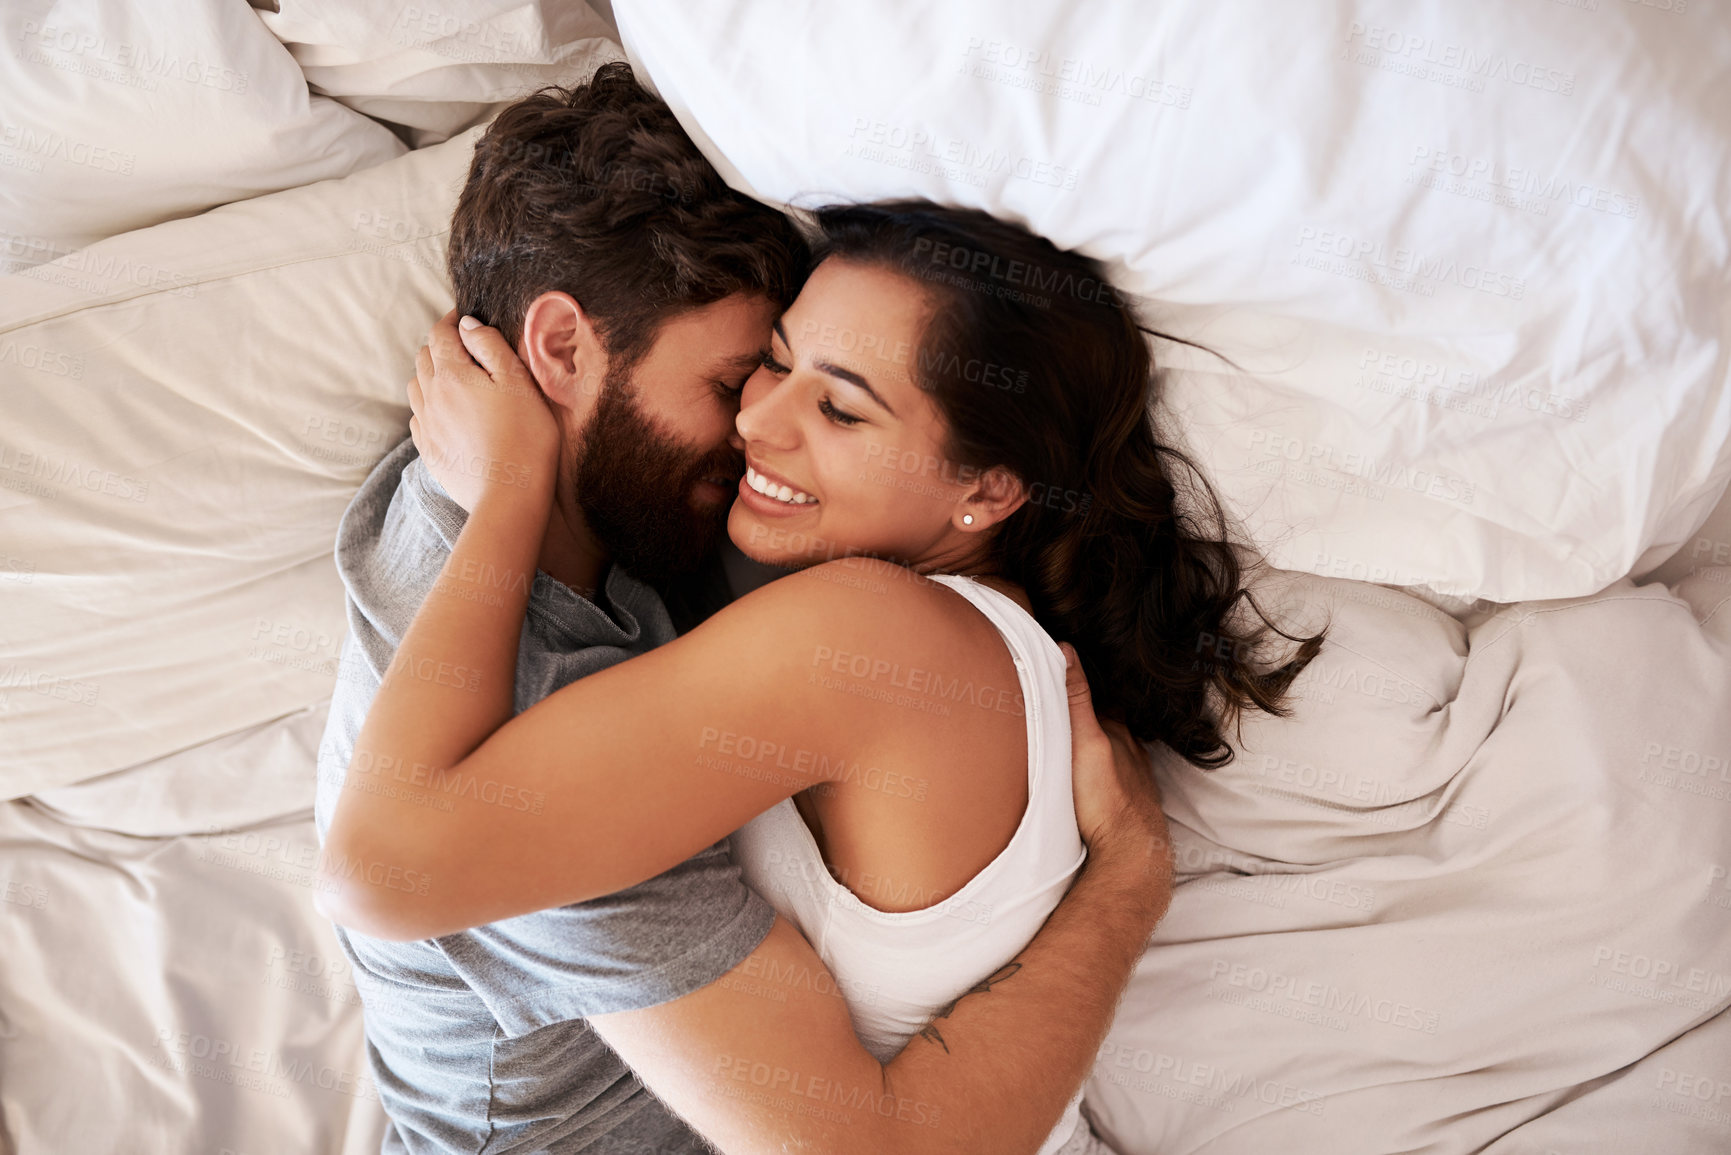 Buy stock photo Home bedroom, affection and happy couple hug, relax and enjoy relax morning together, bonding and smile. Happiness, intimate and top view of romantic woman, man or people embrace on hotel bed fabric